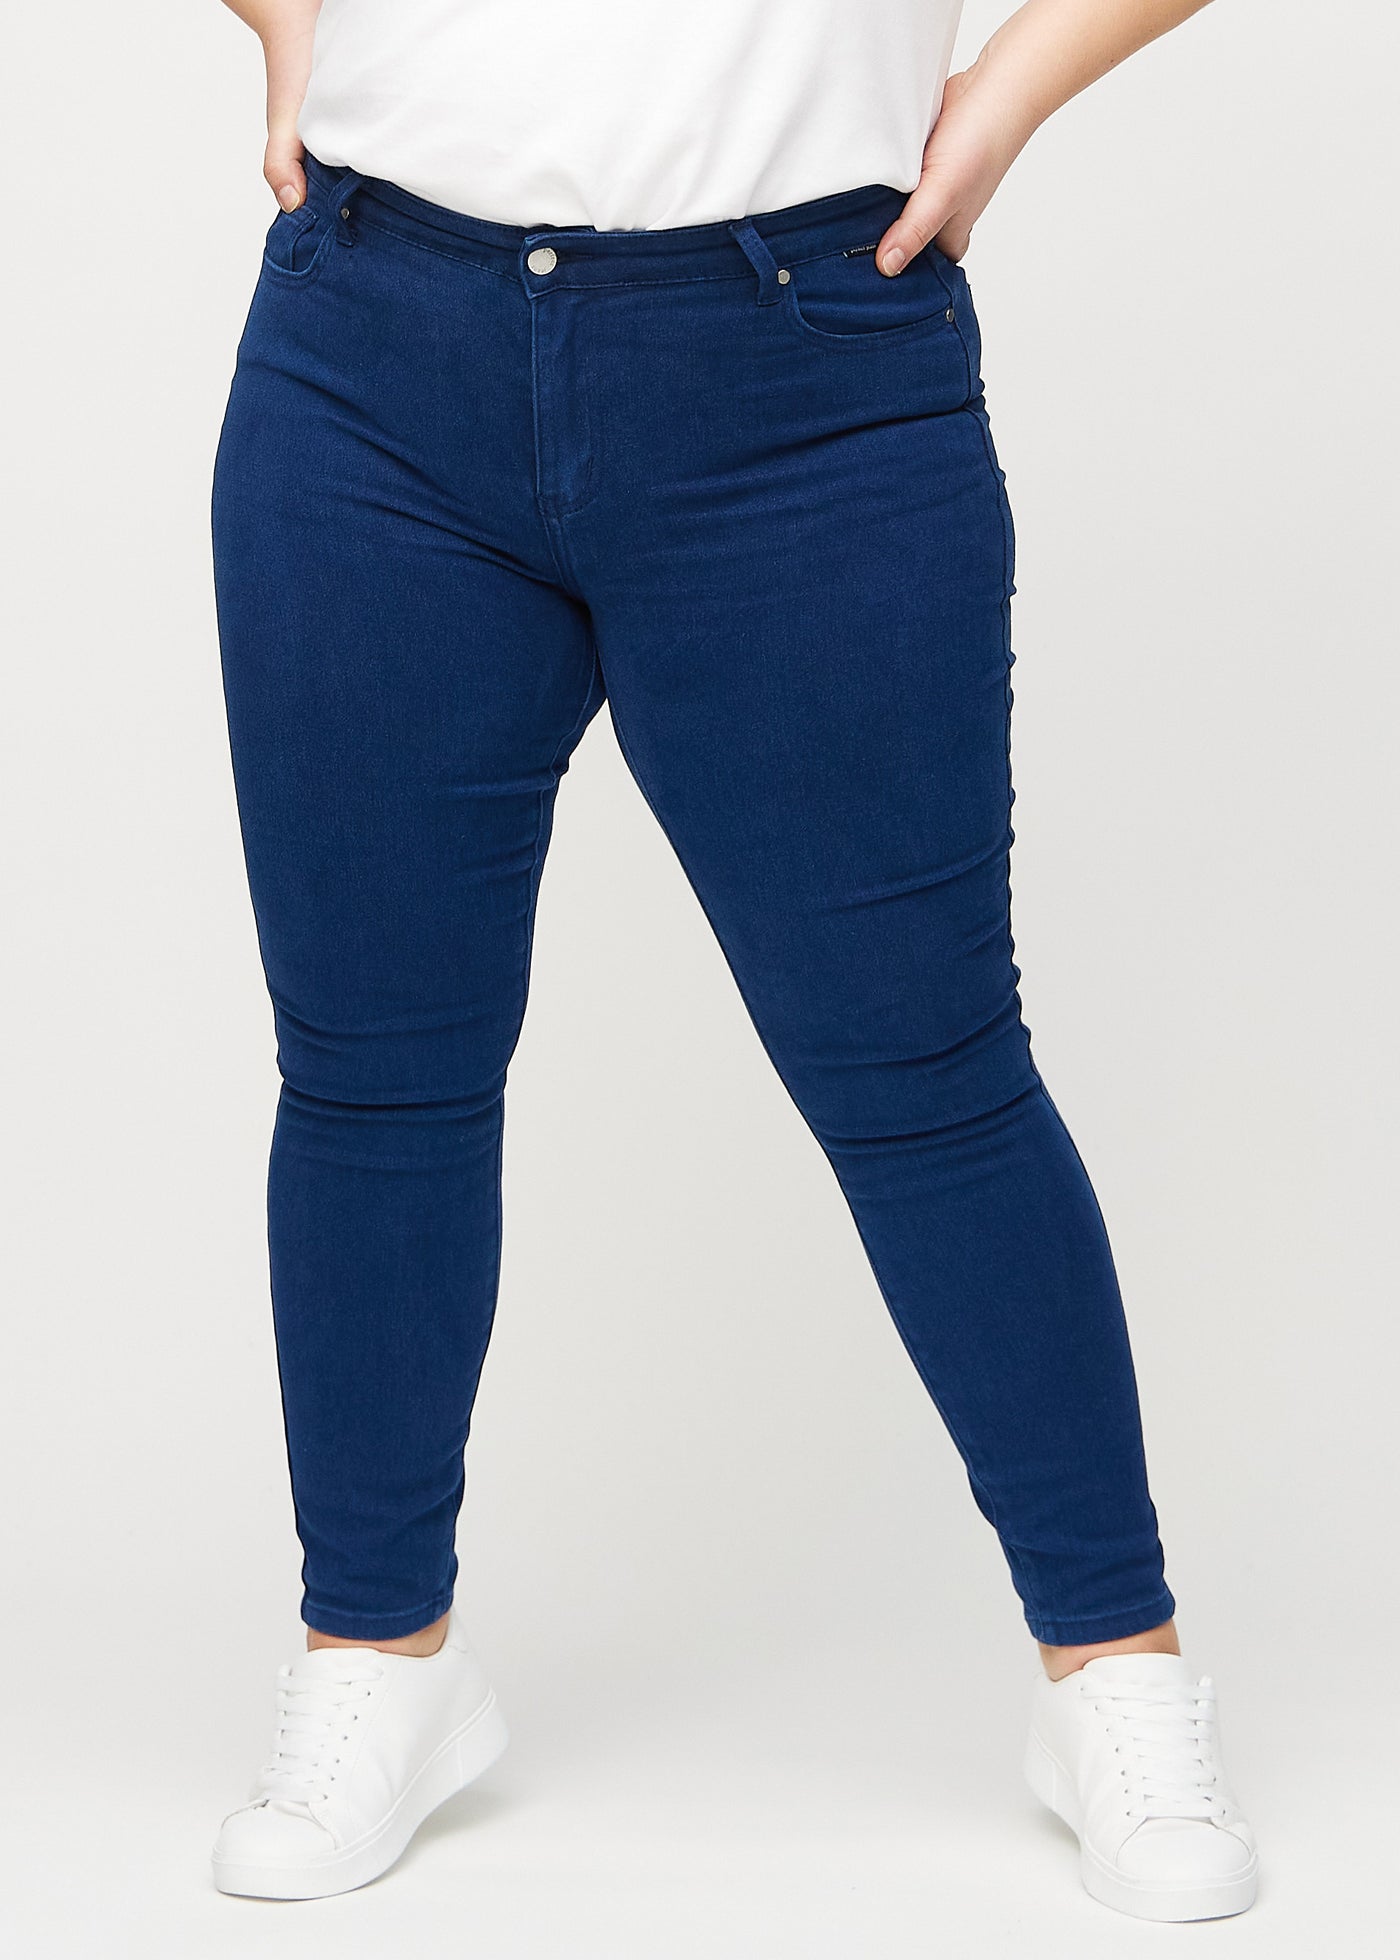 Perfect Jeans - Skinny - Royals™